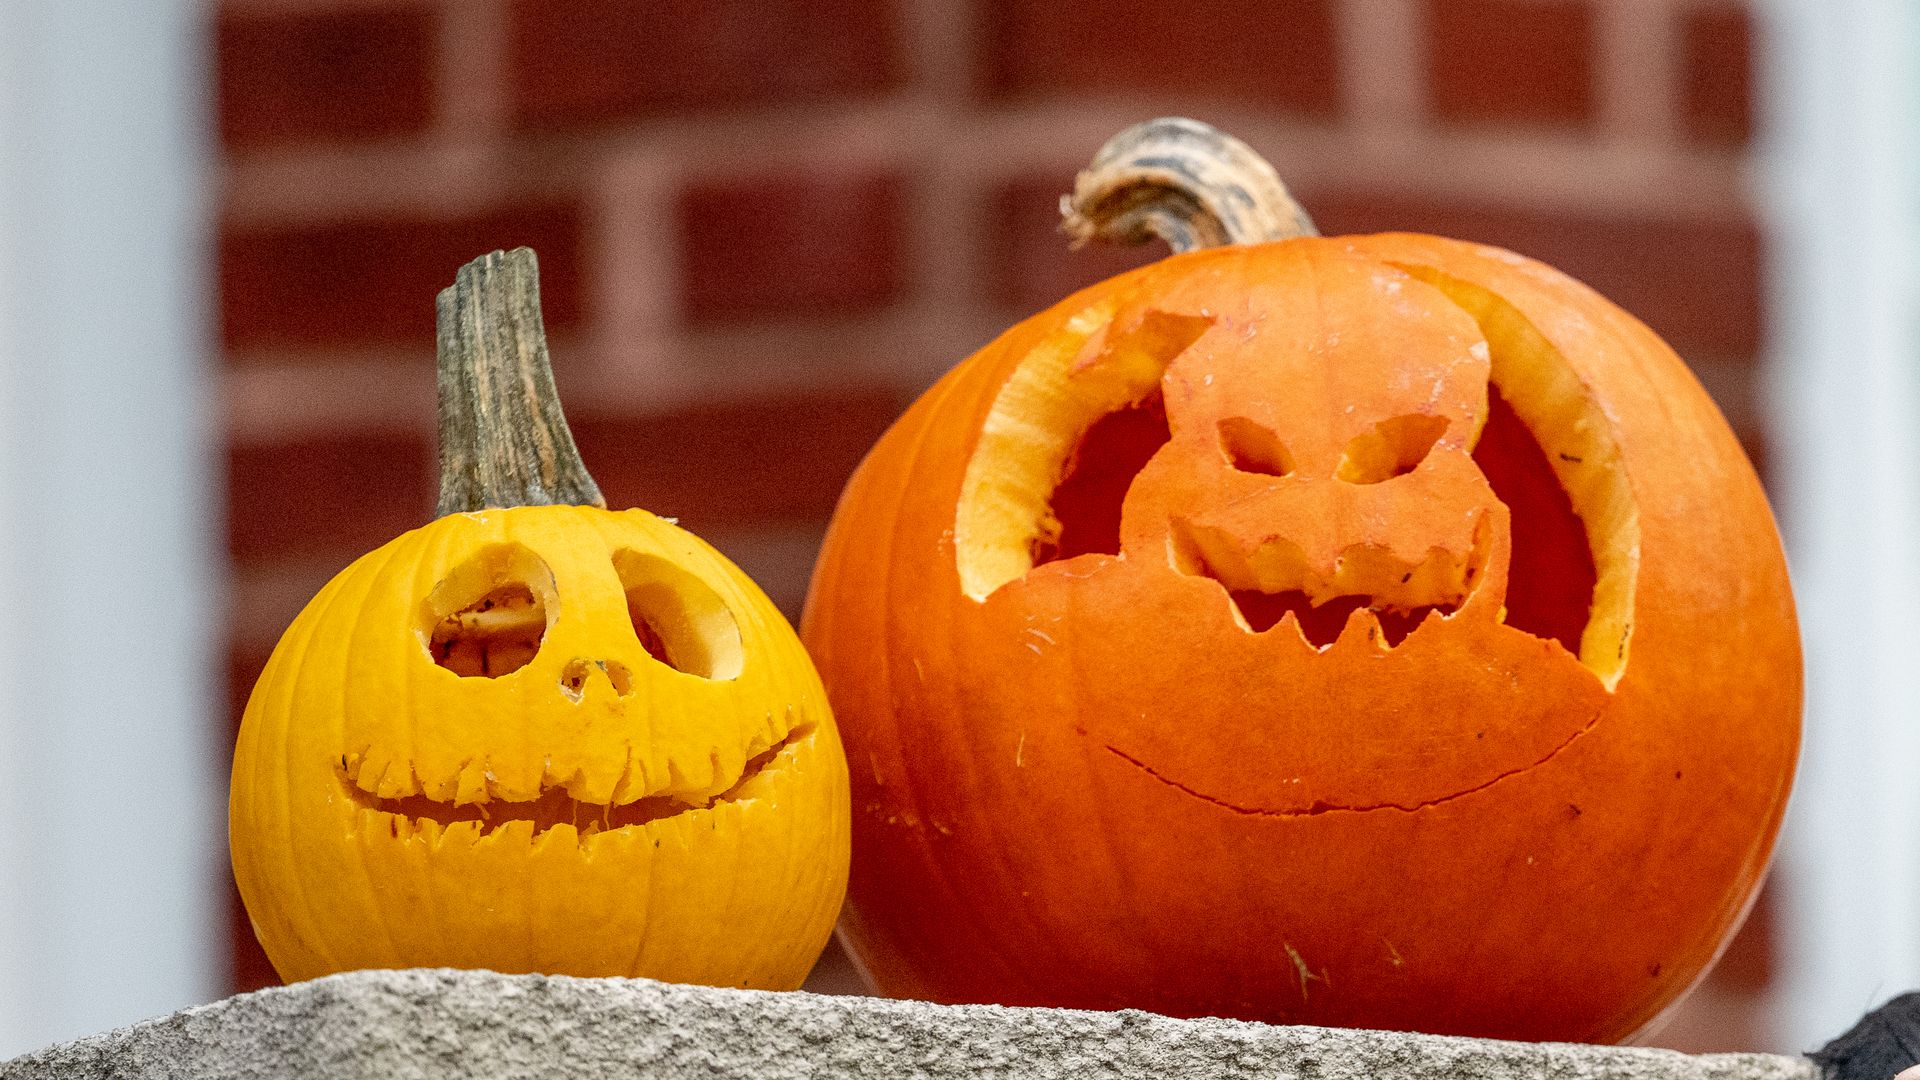 Two pumpkins carved like Jack Skellington and Oogie Boogie from "The Nightmare Before Christmas"